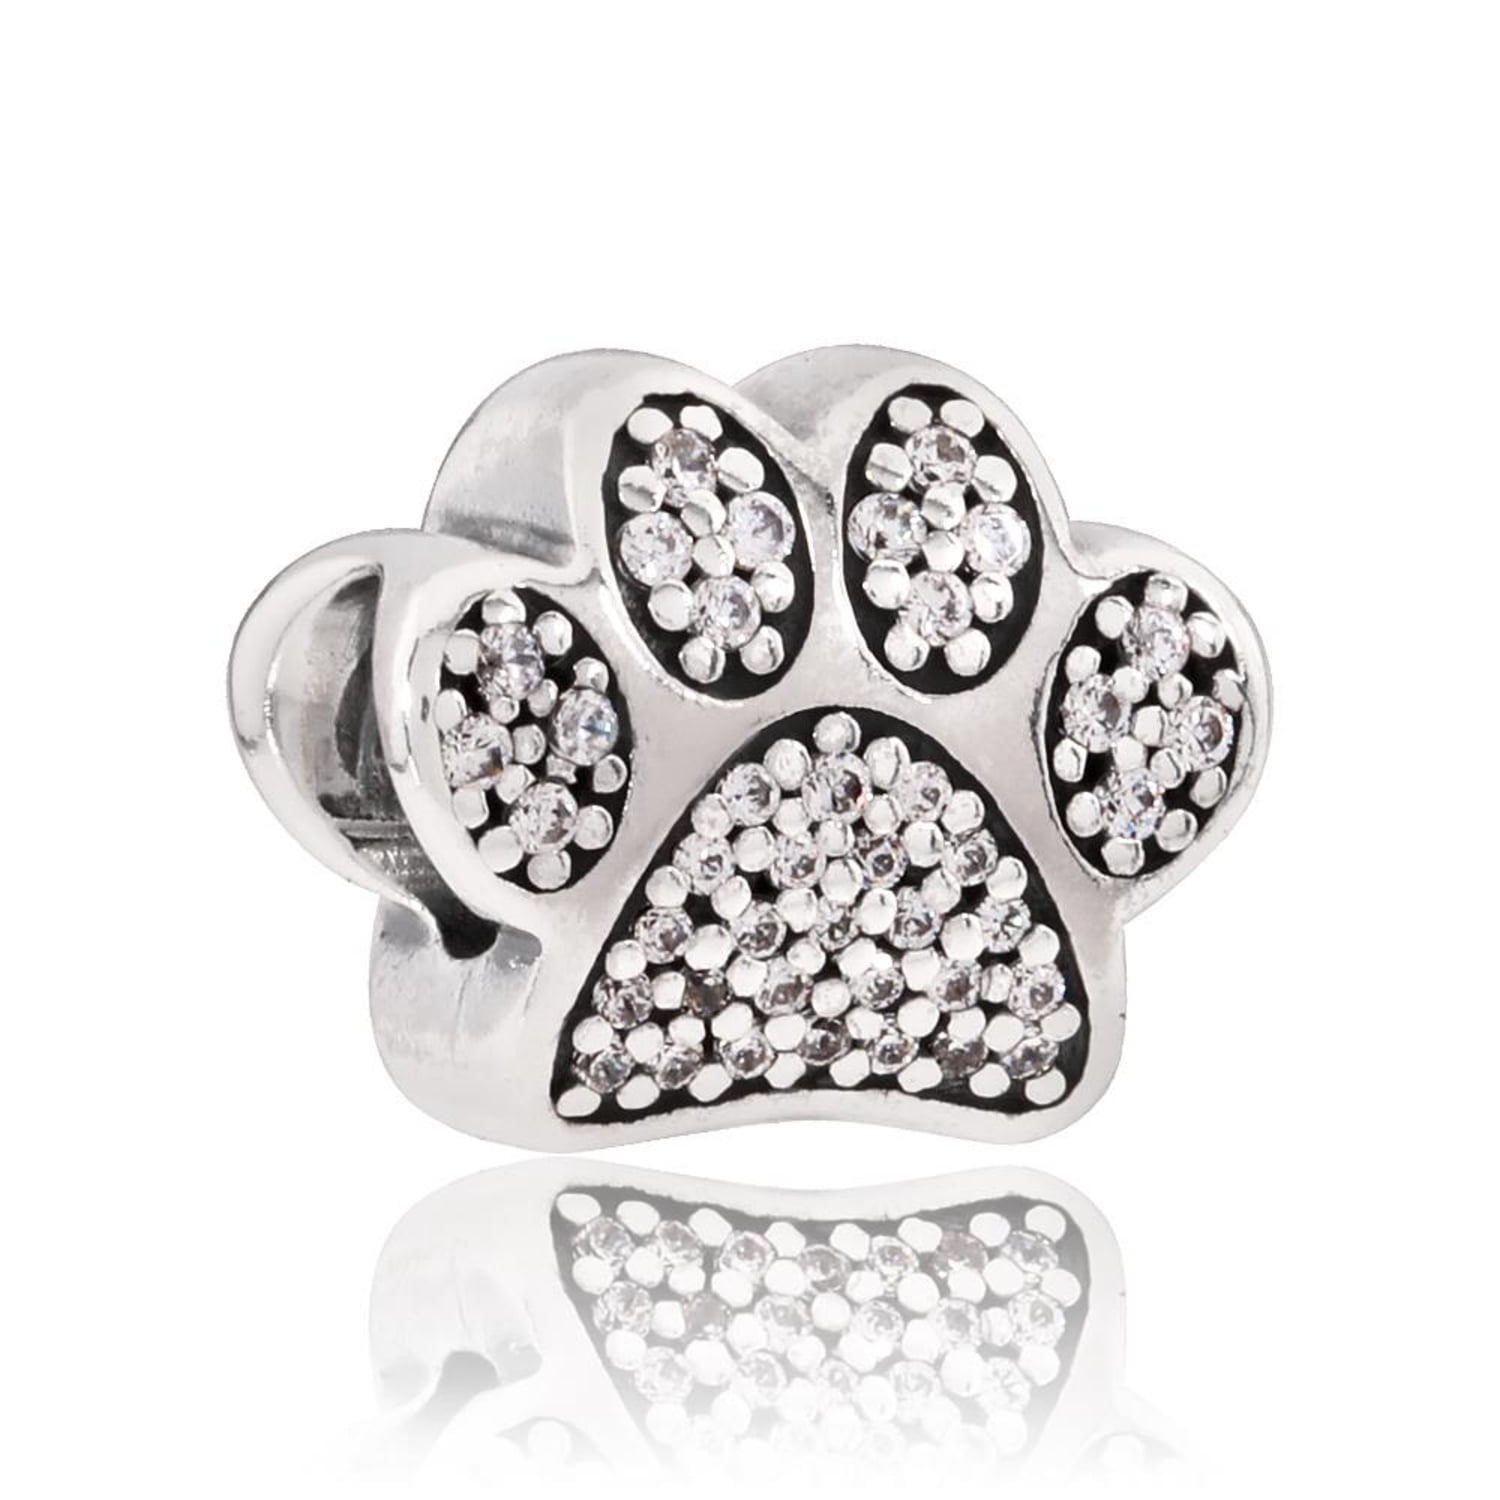 Wostu European S925 Sterling Silver Charm Paw Prints with Clear CZ for Bracelet 